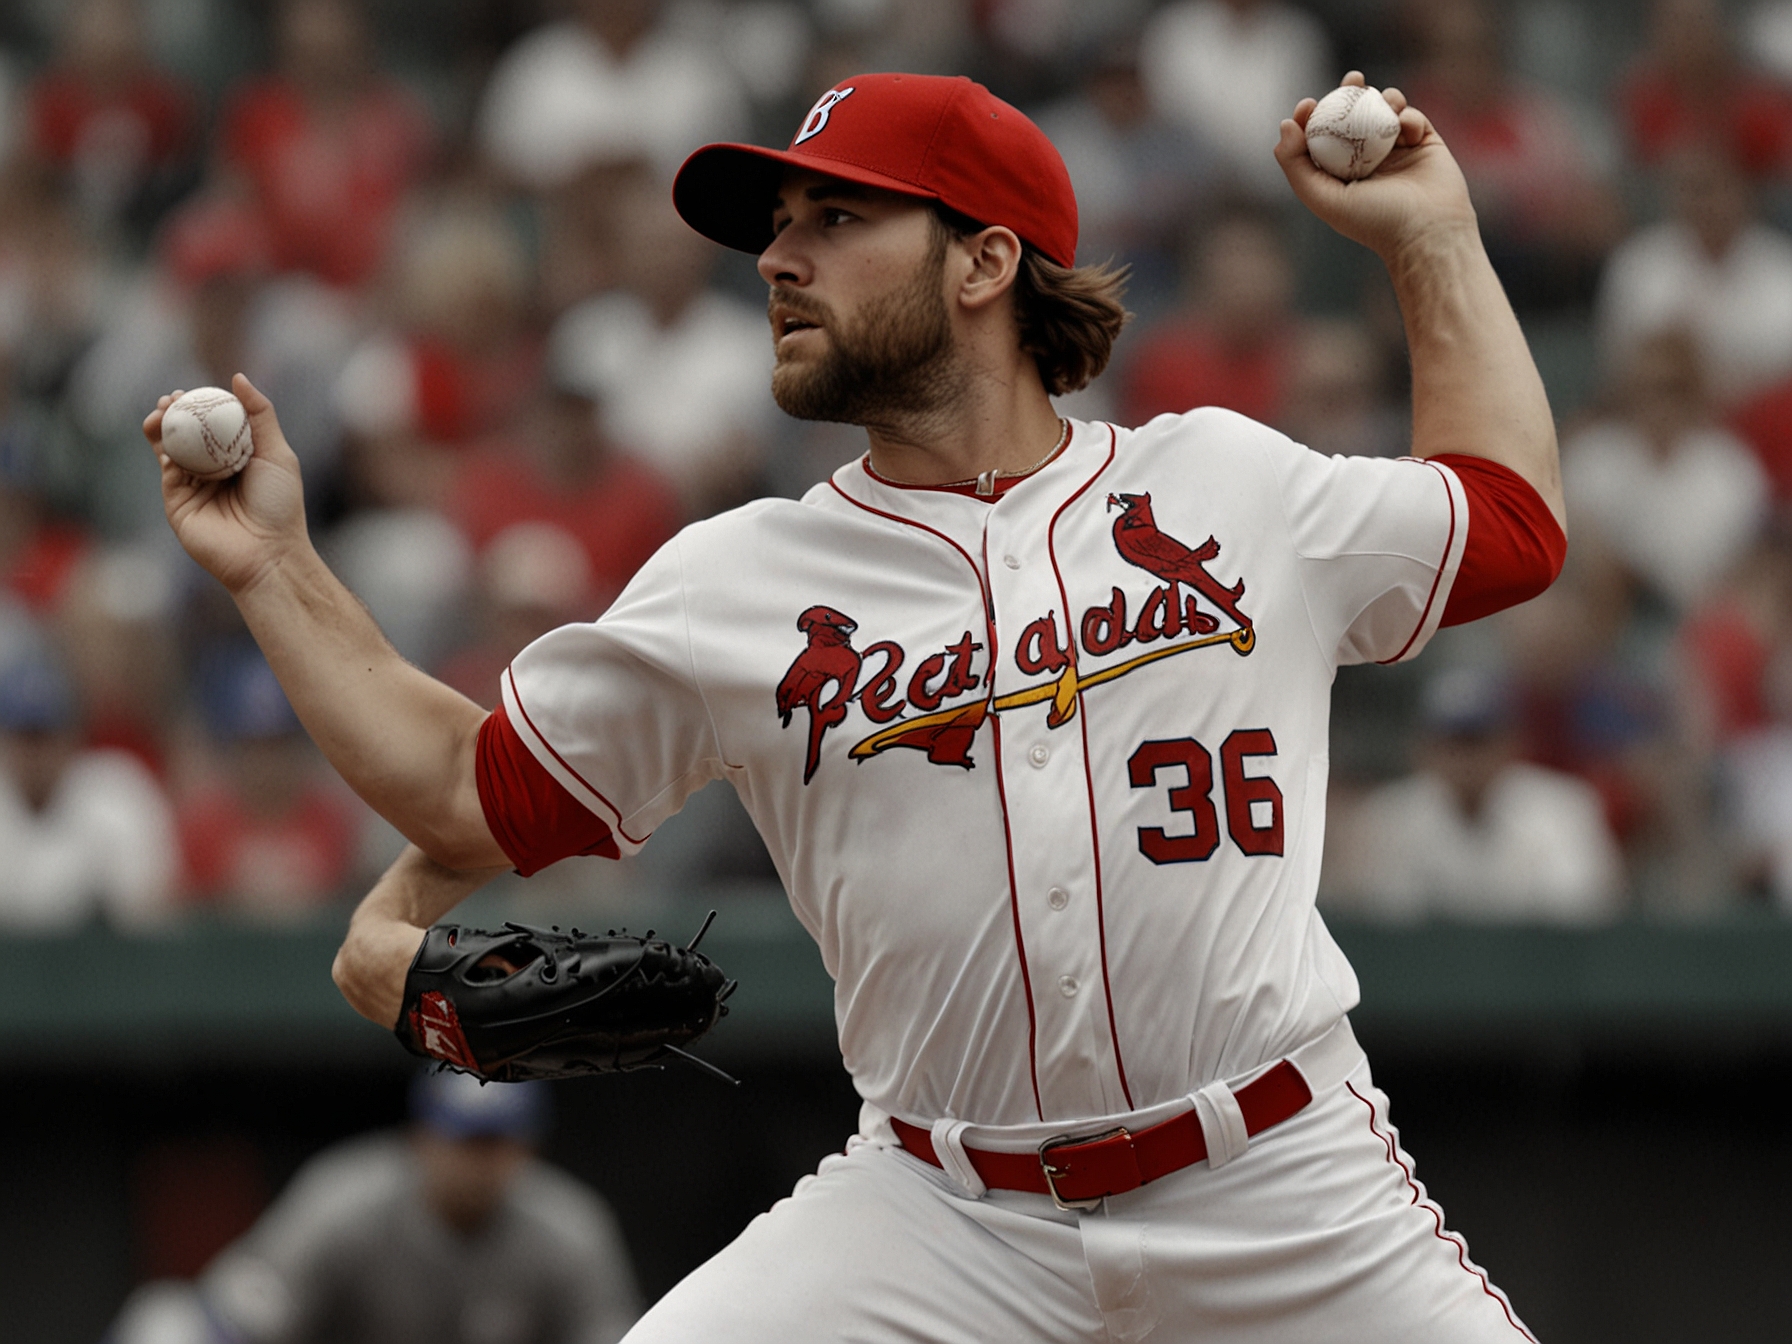 Michael Wacha delivers a powerful pitch against the Texas Rangers, showcasing his return to form after a three-week hiatus. His focused performance, however, lacked offensive support from the Royals.